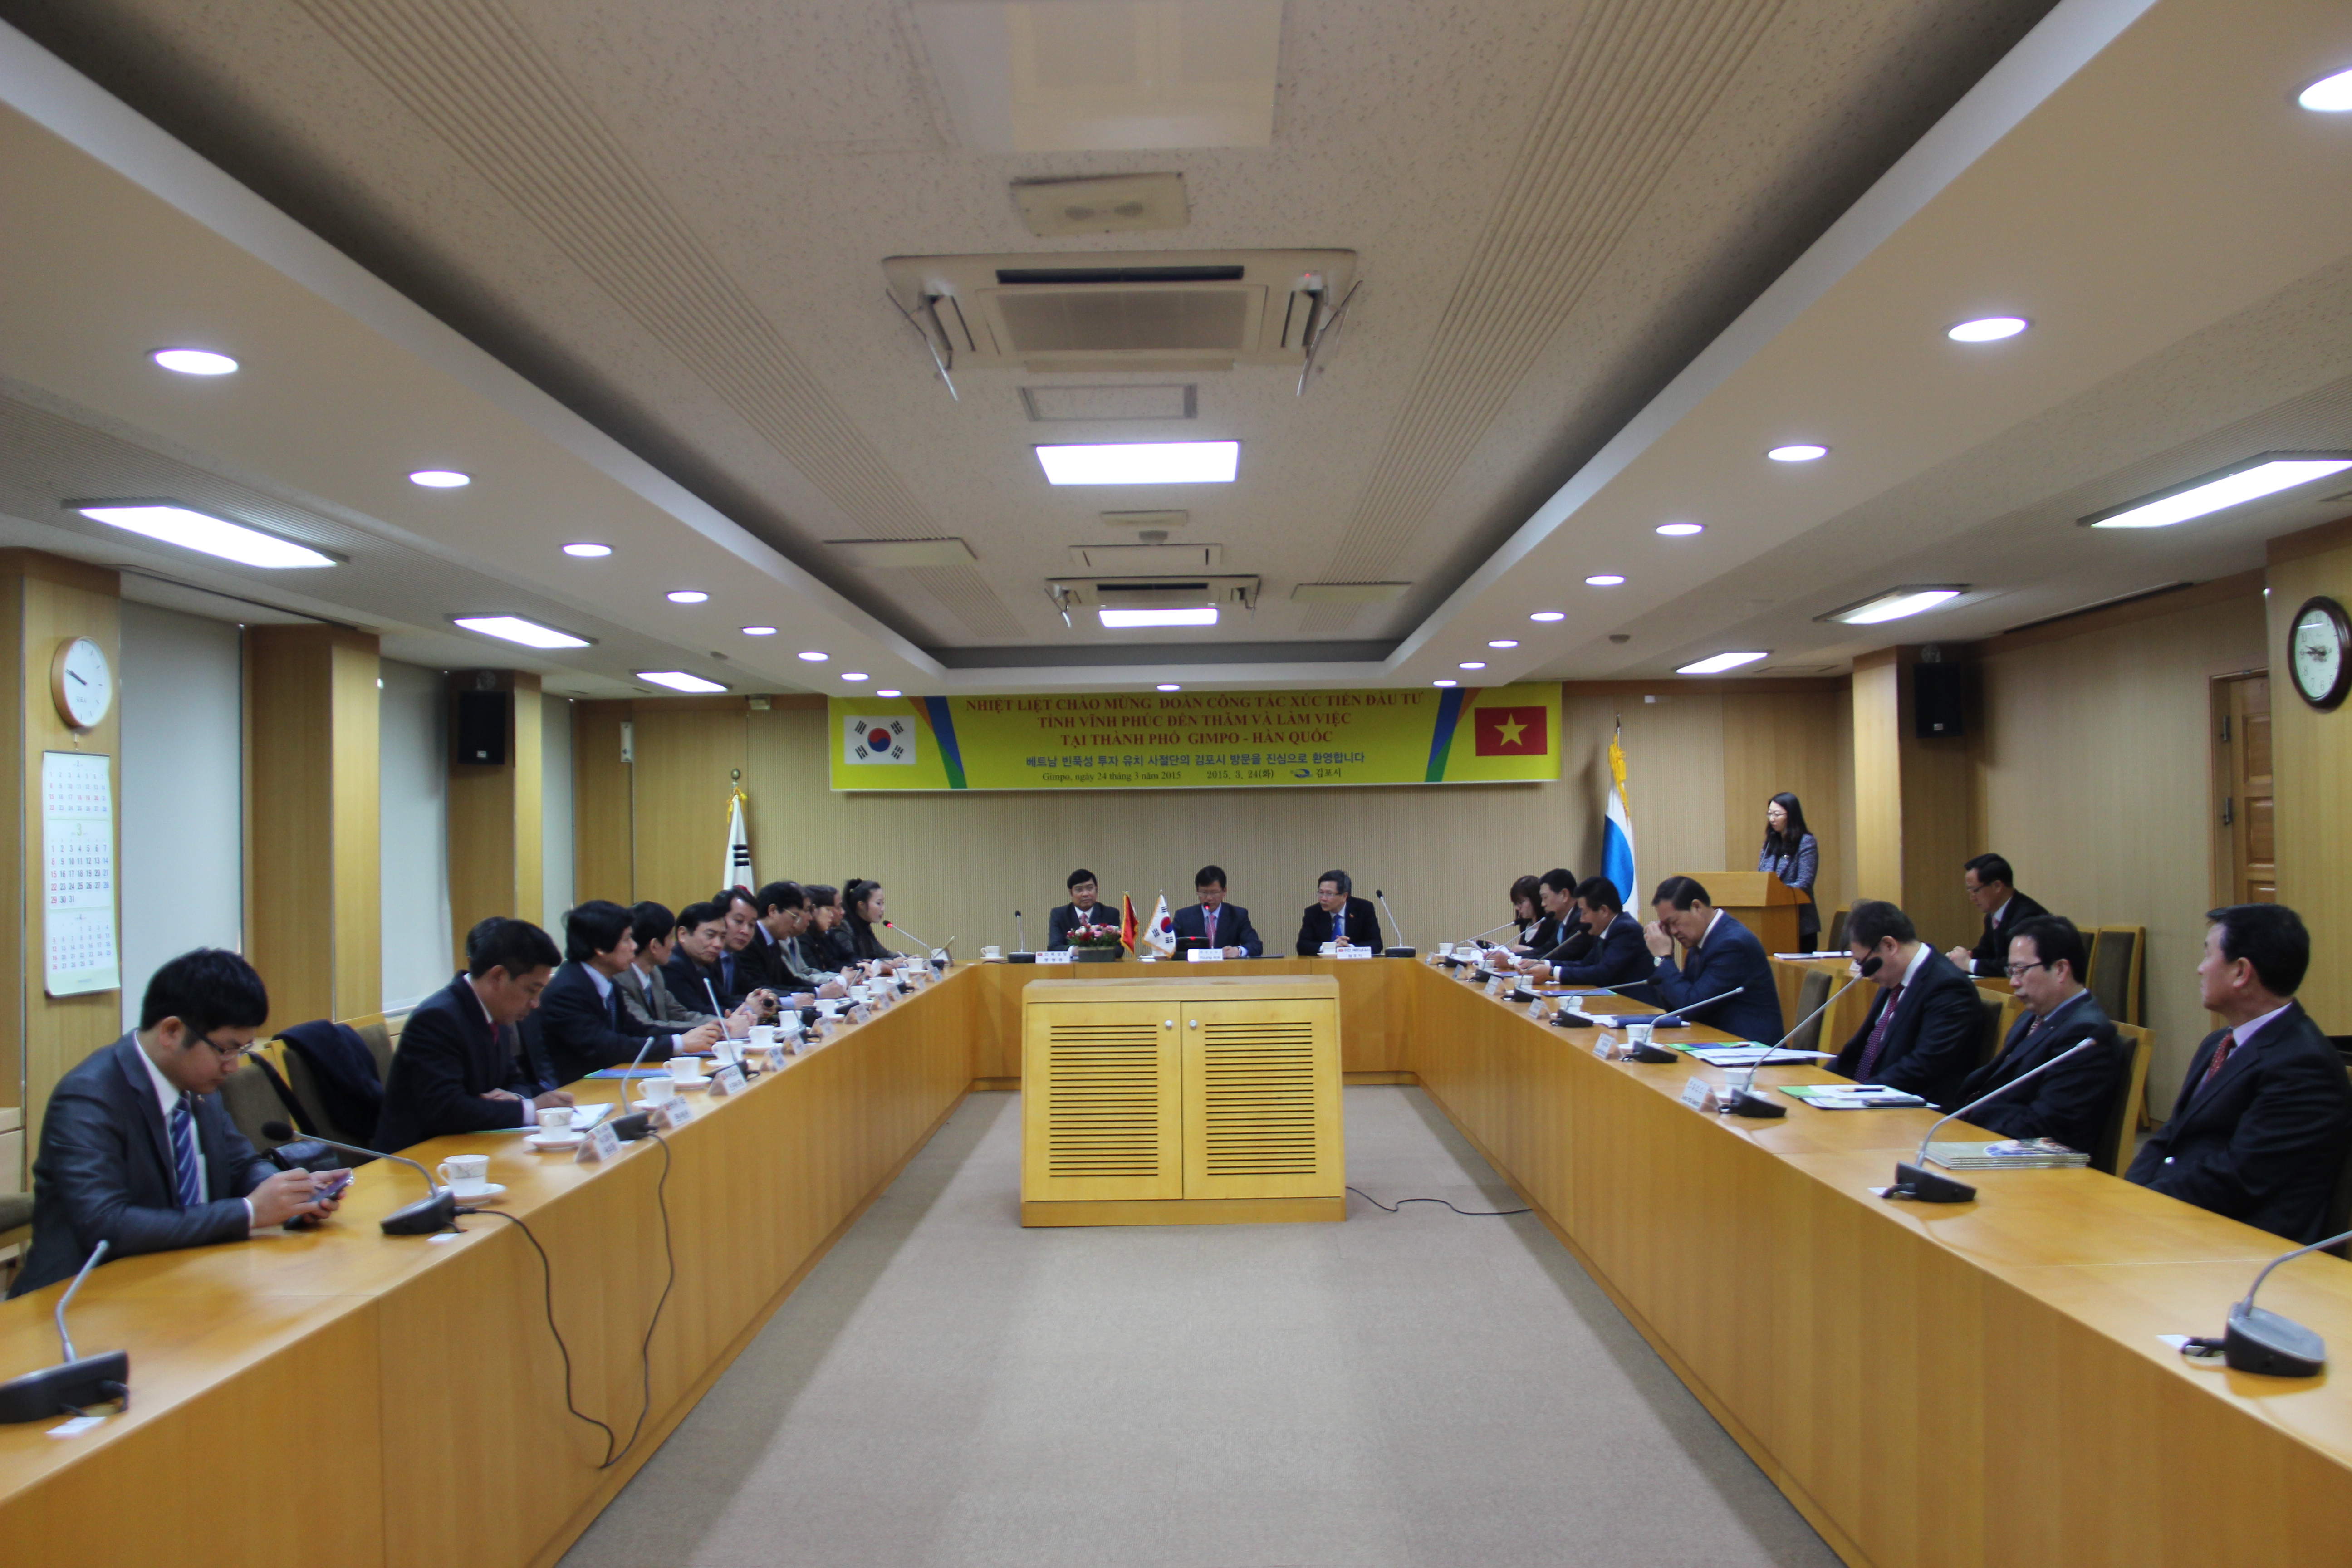 Investment promotion activities of Vinh Phuc province in Gimpo city, South Korea